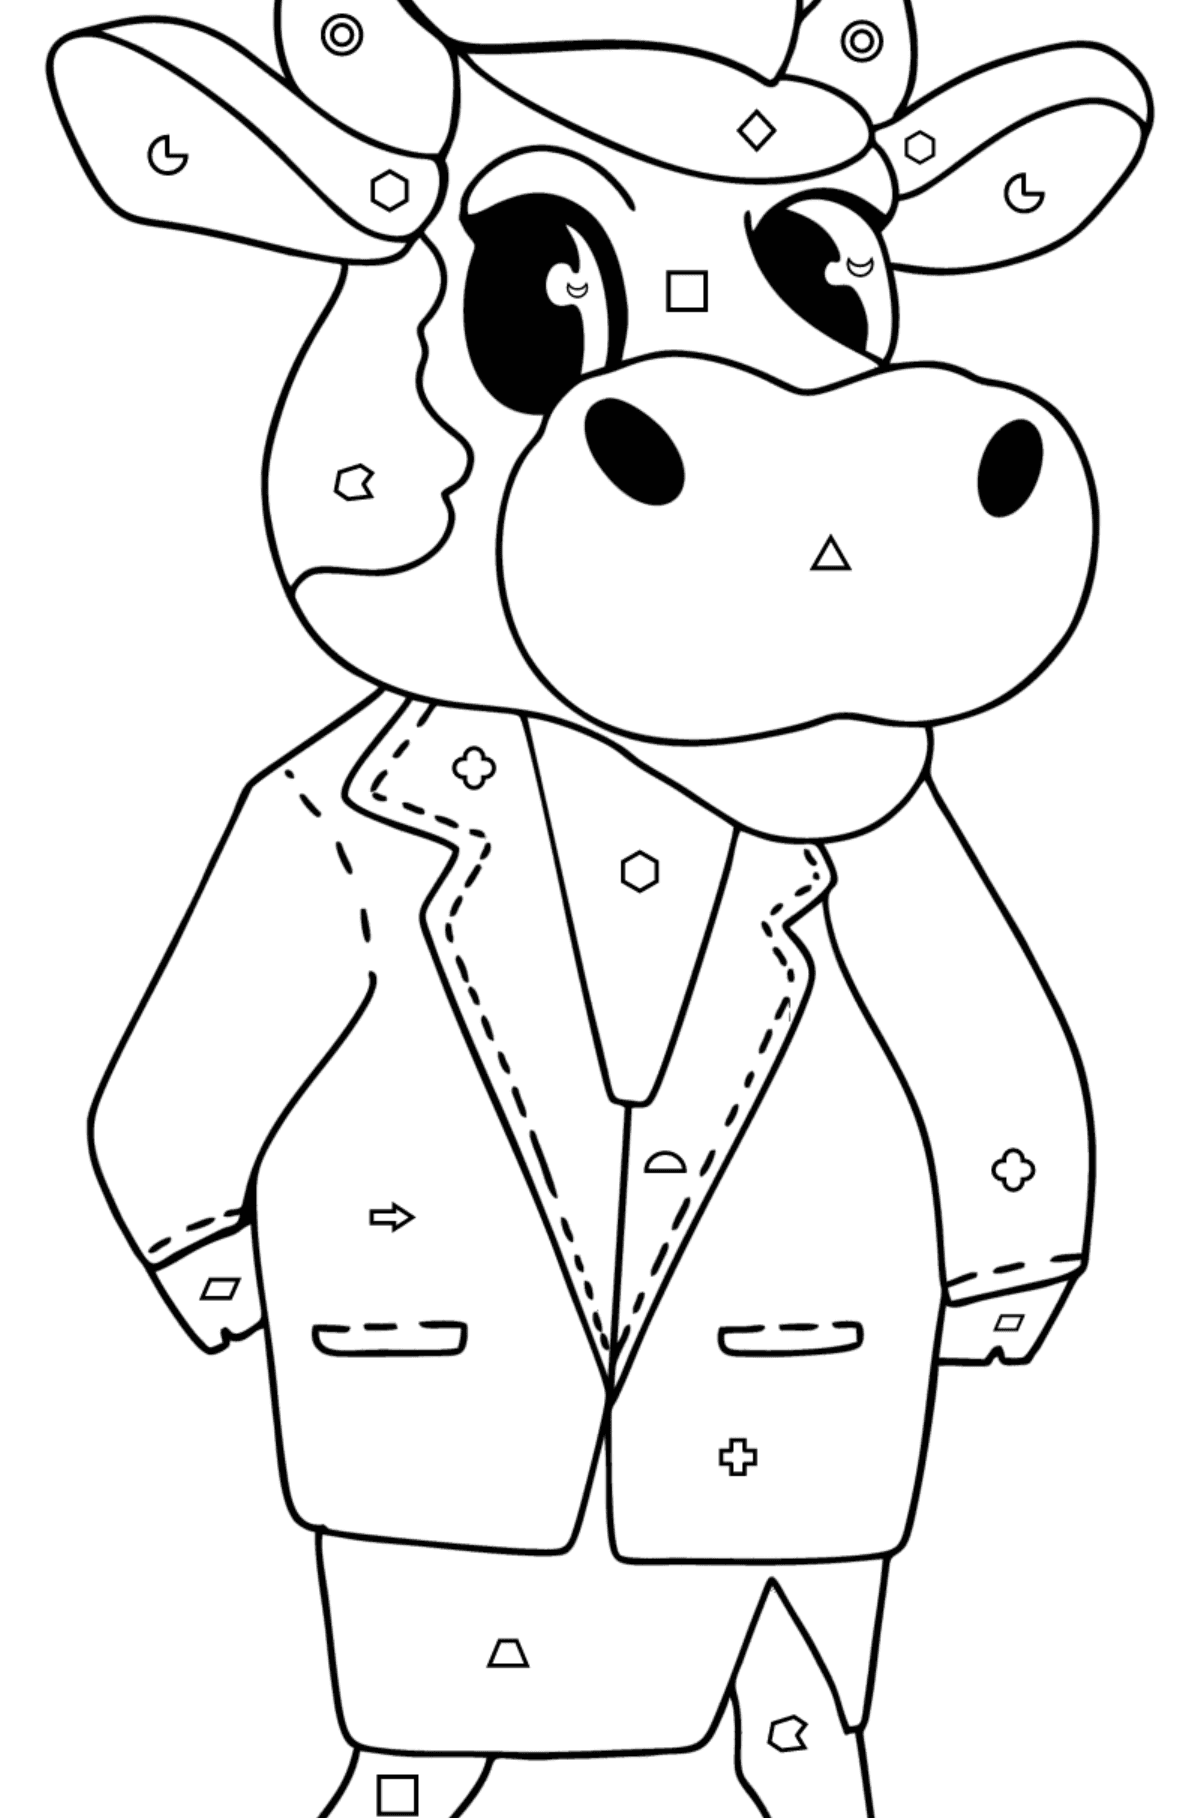 Cartoon cow coloring page - Coloring by Geometric Shapes for Kids